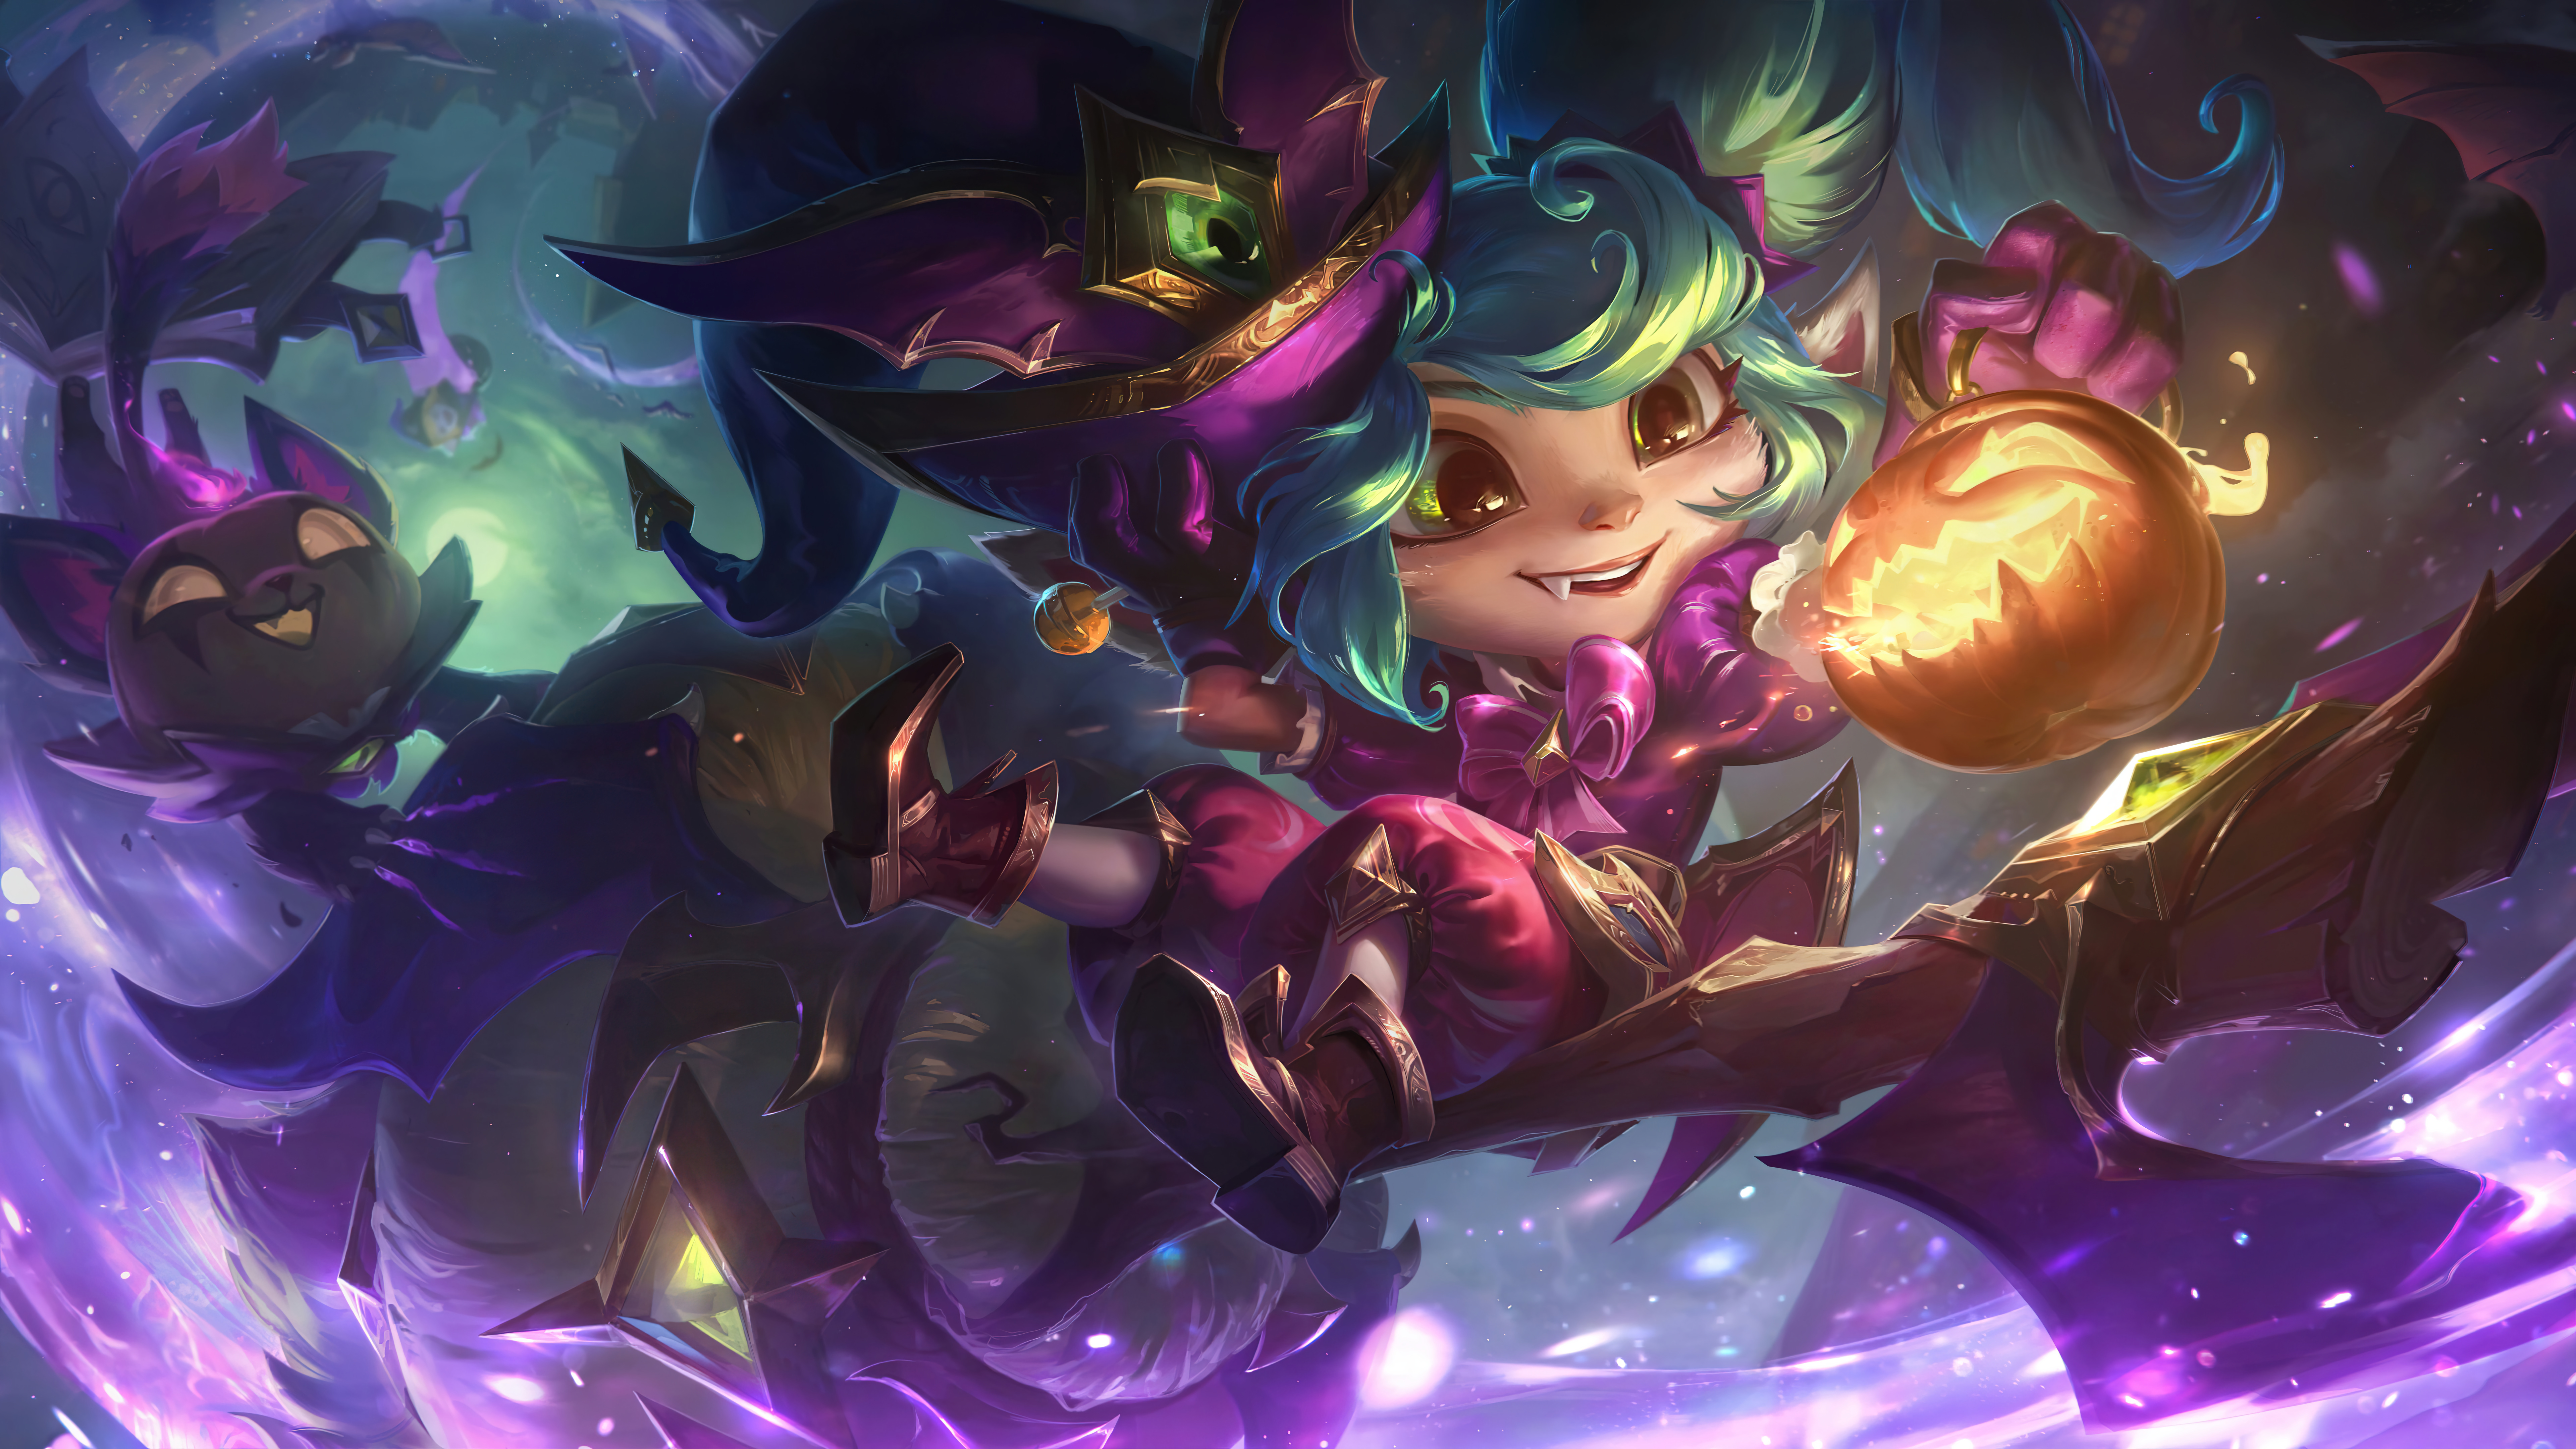 General 7680x4320 Bewitching Poppy (League of Legends) Poppy ( league of legends ) Riot Games GZG 4K digital art Halloween witch pumpkin pumpkin night video game girls PC gaming video game characters